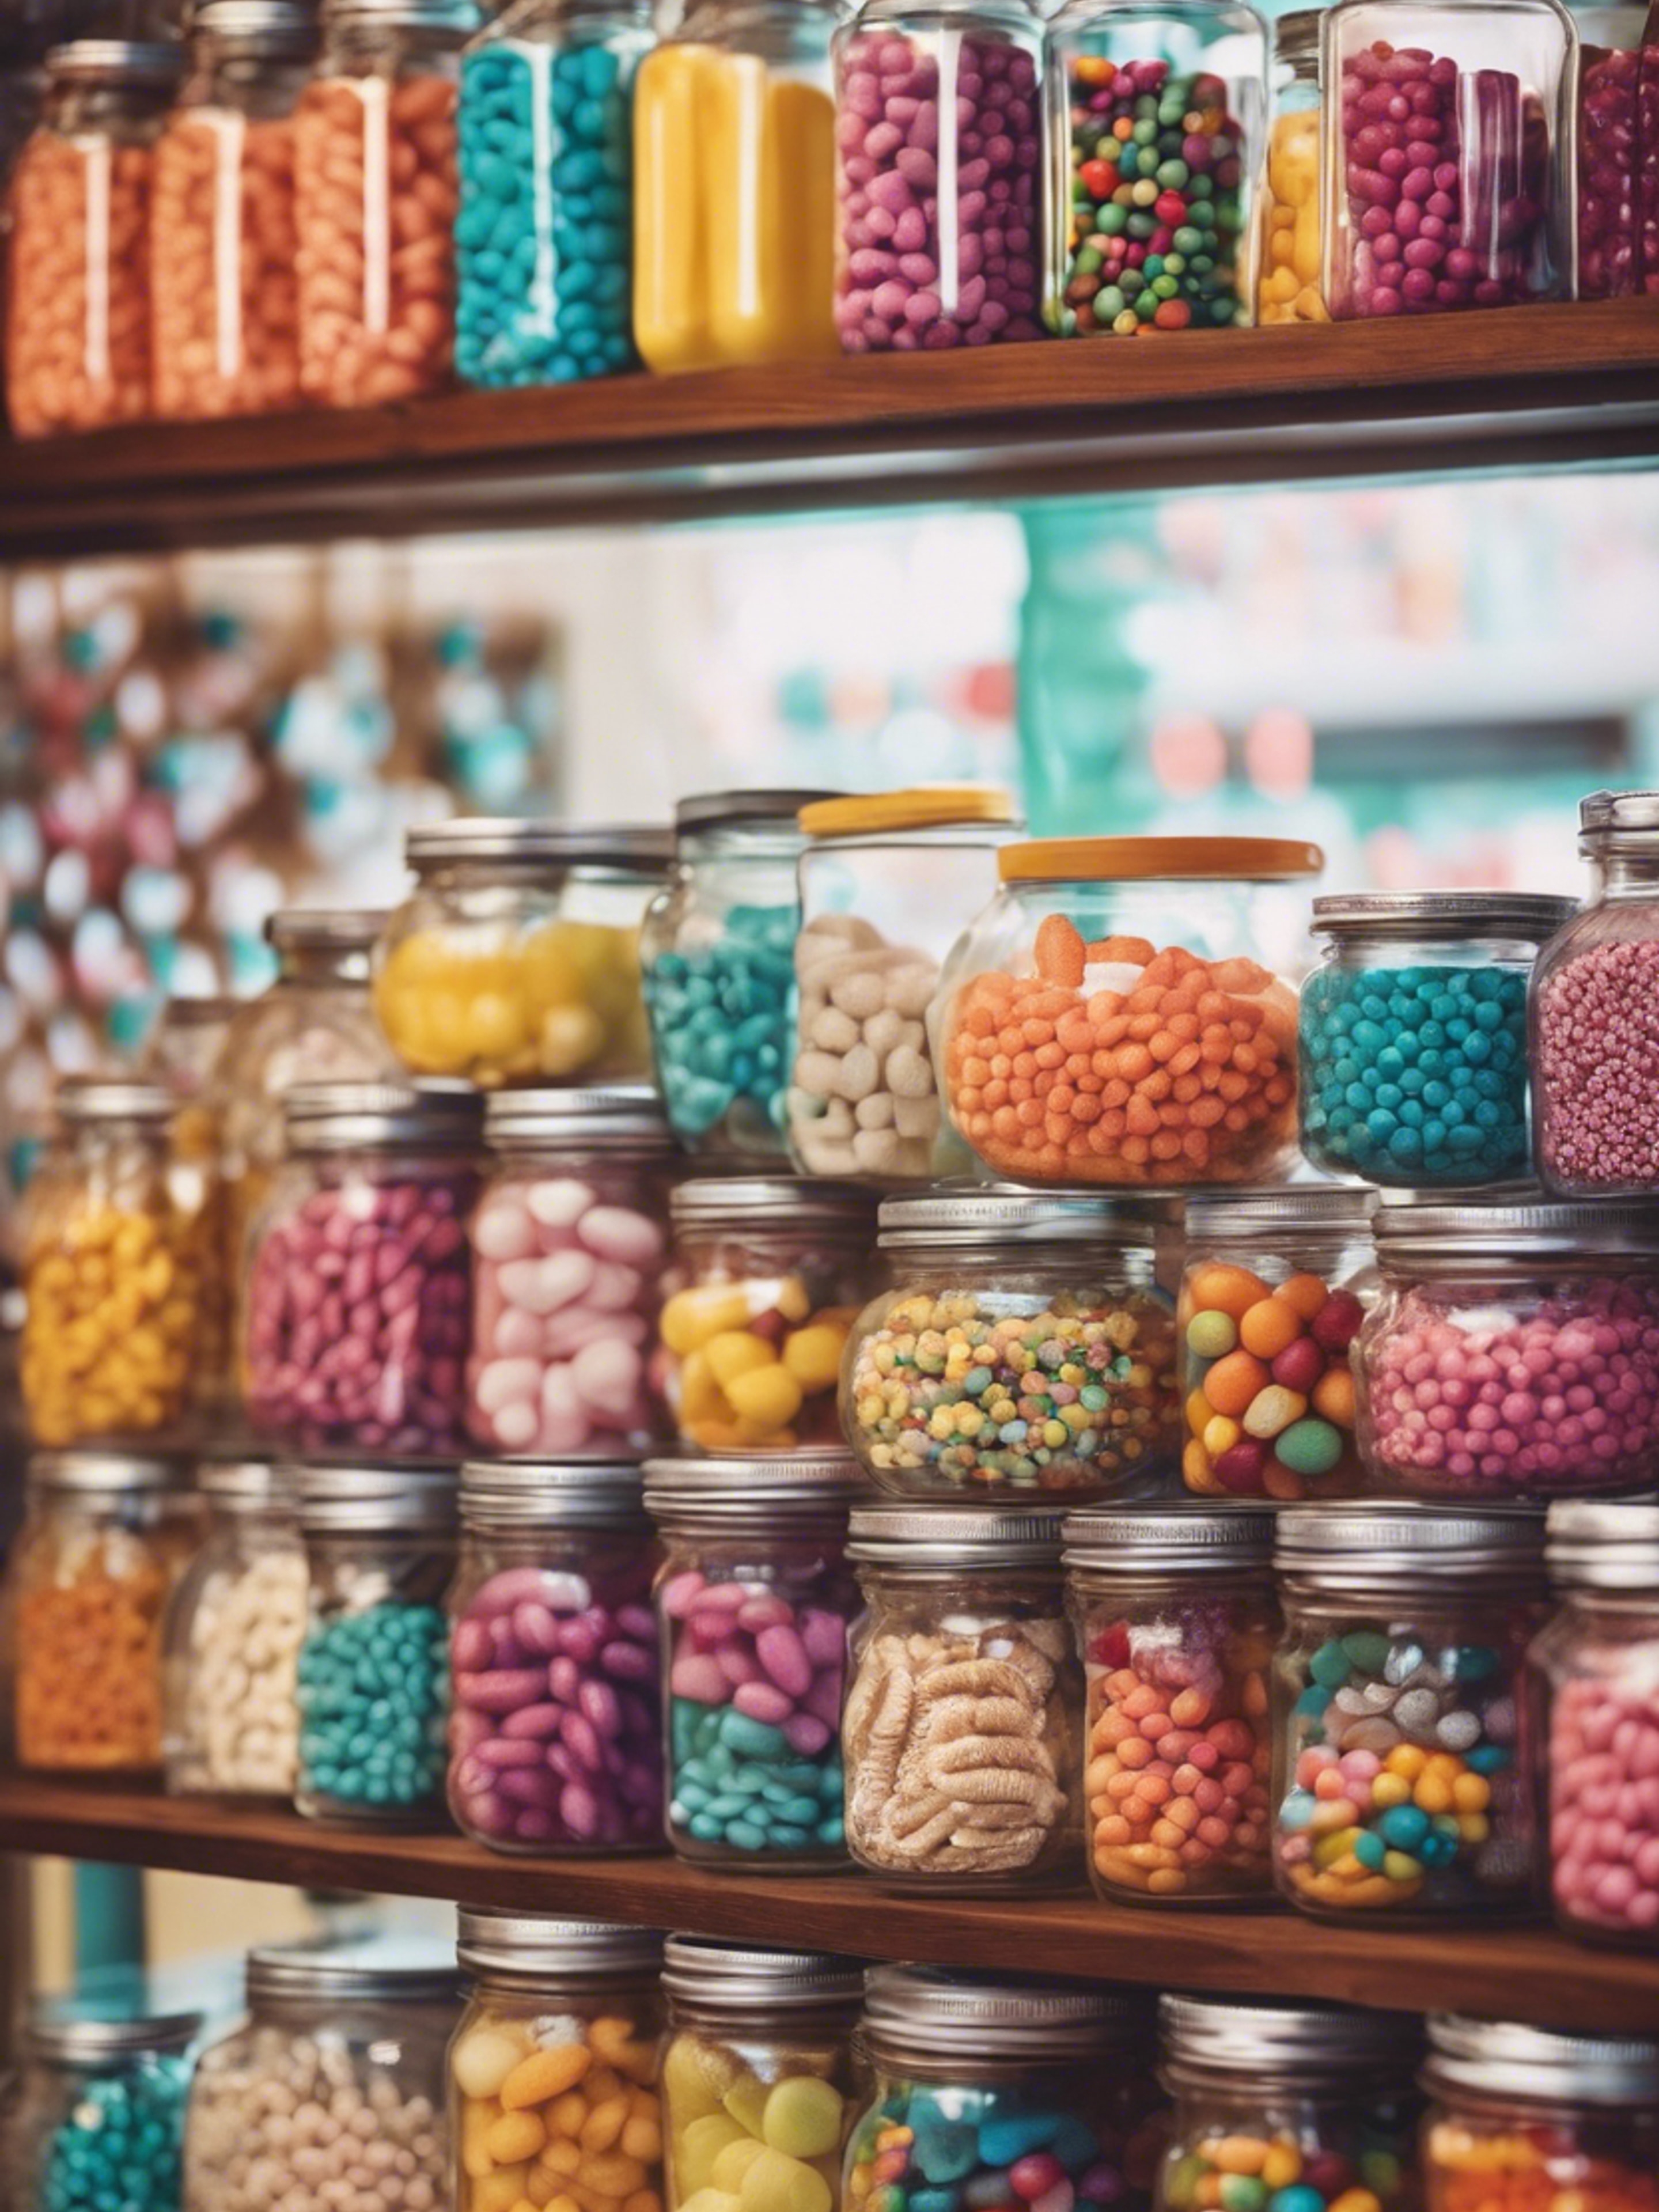 Retro candy store filled with jars of colorful treats. Валлпапер[53bdbe1ef5c6451abca1]